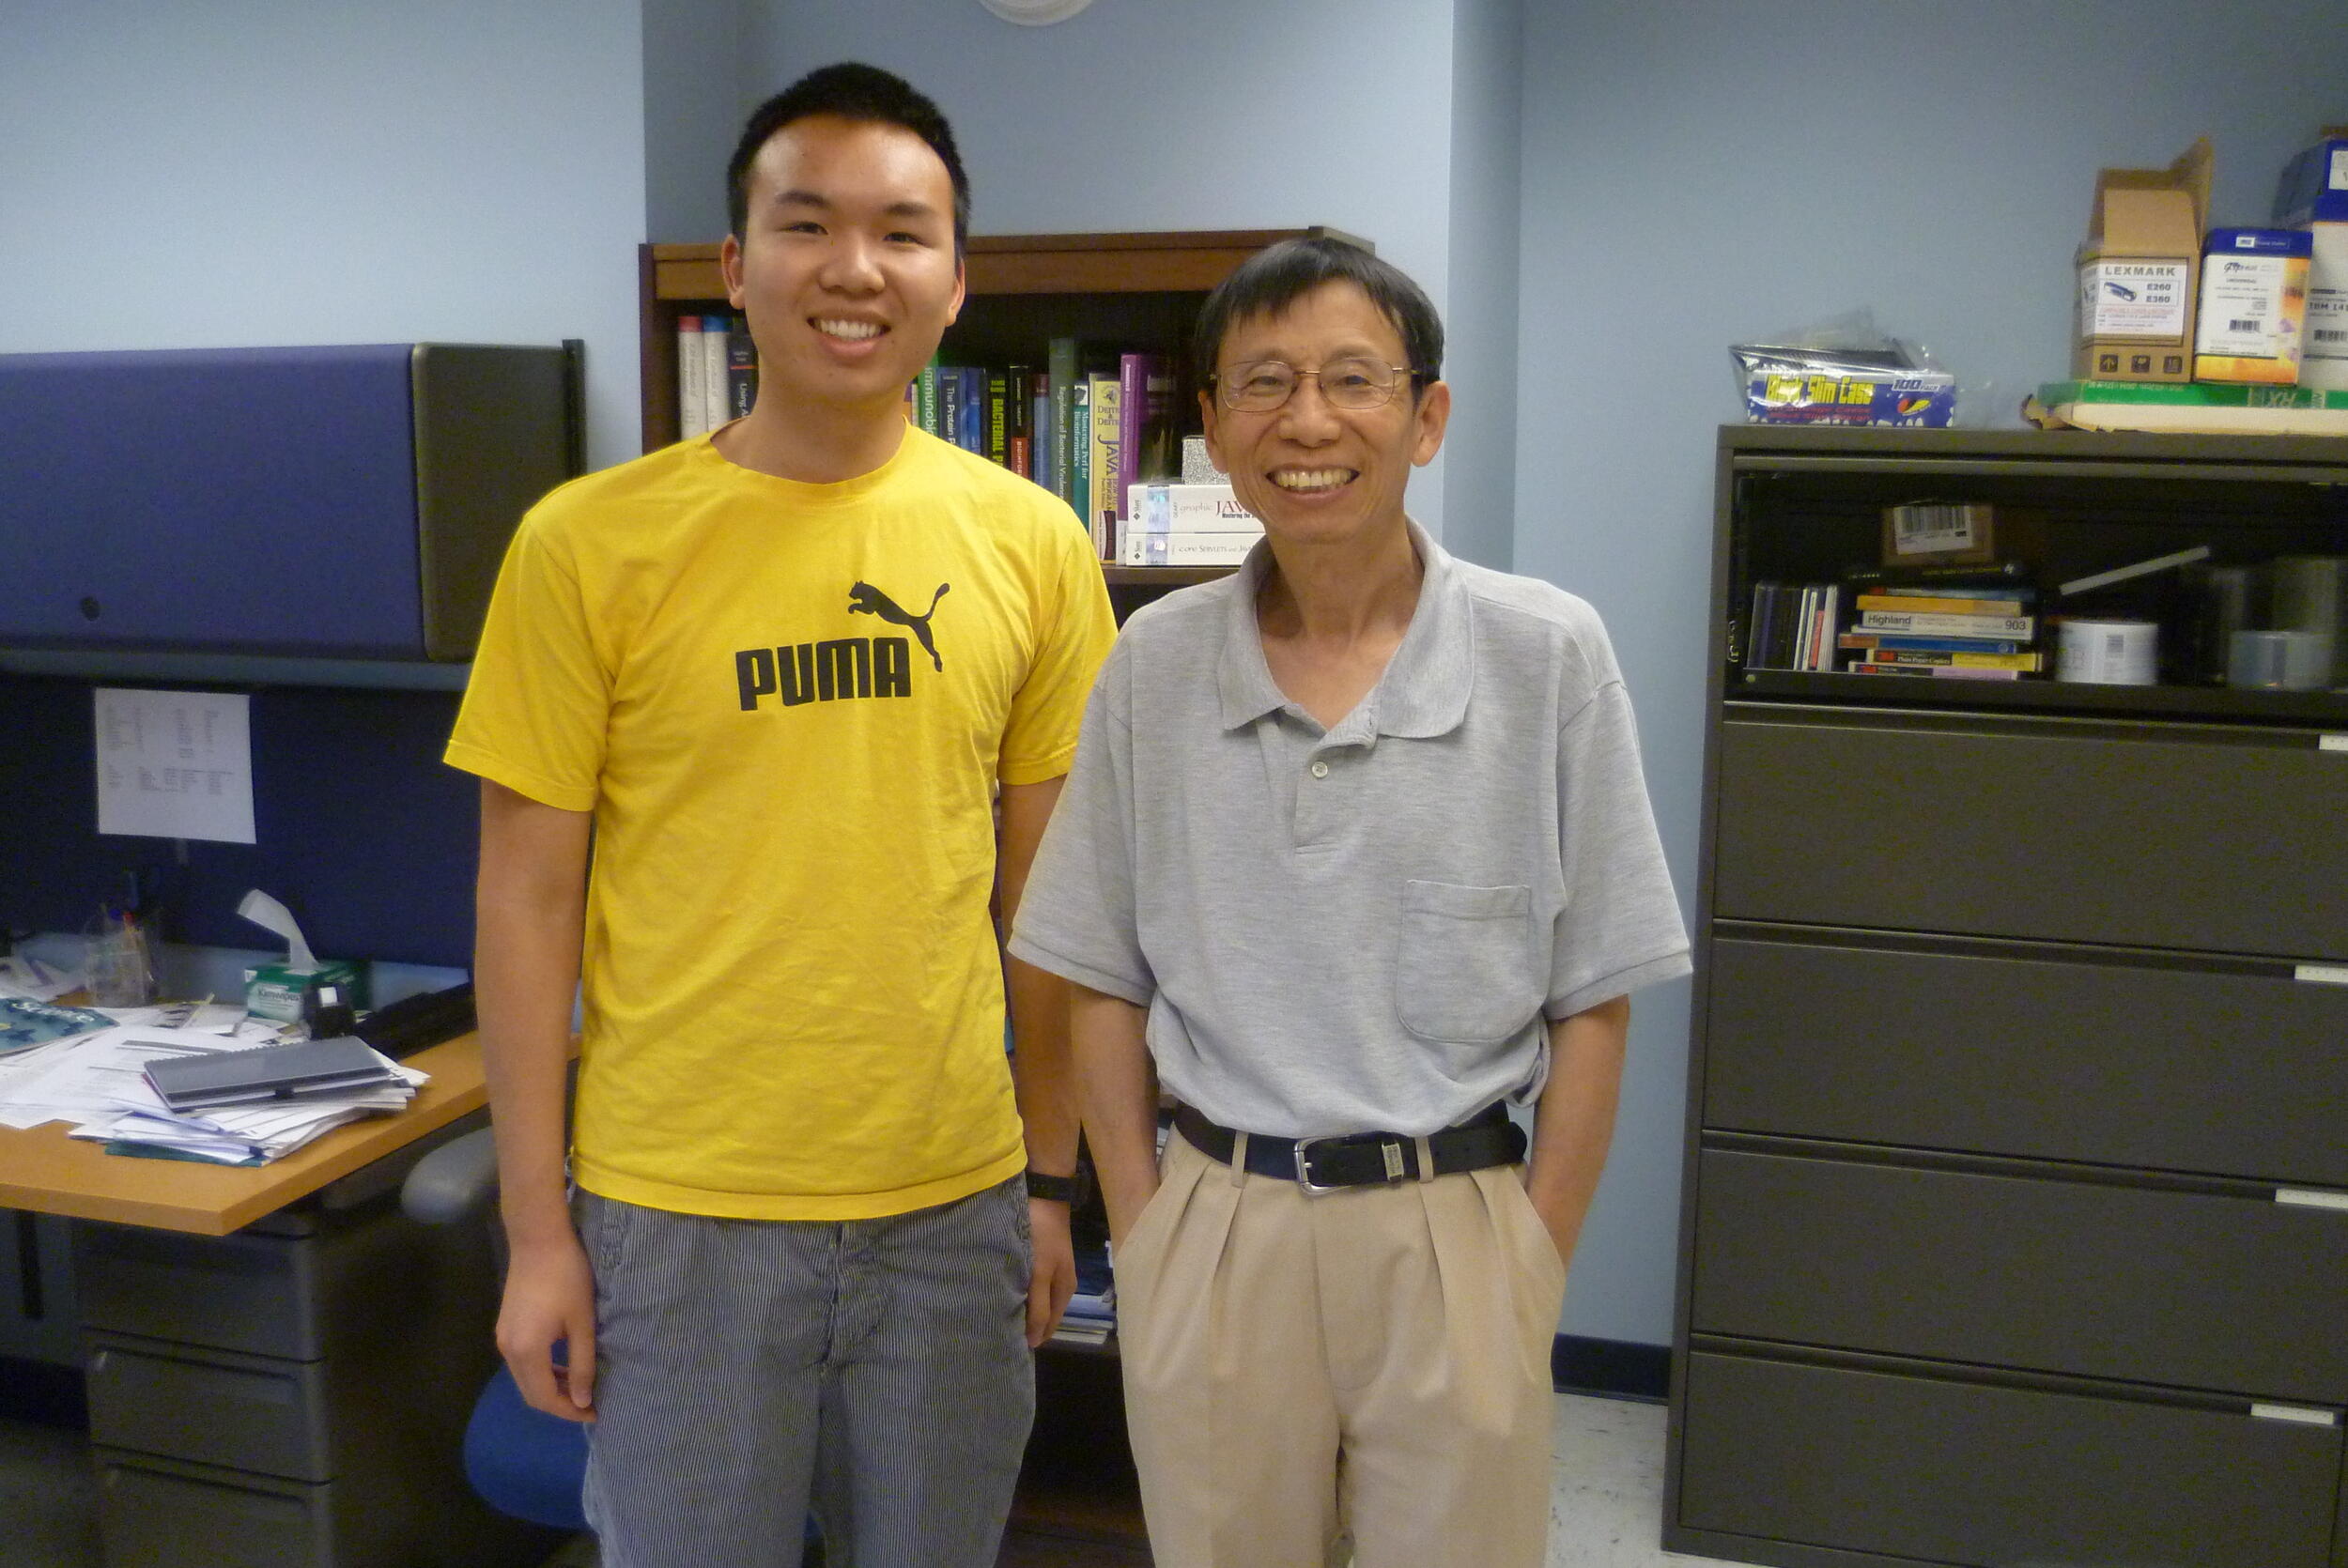 (left) Dylan Vu and (right) Ping Xu, Ph.D.